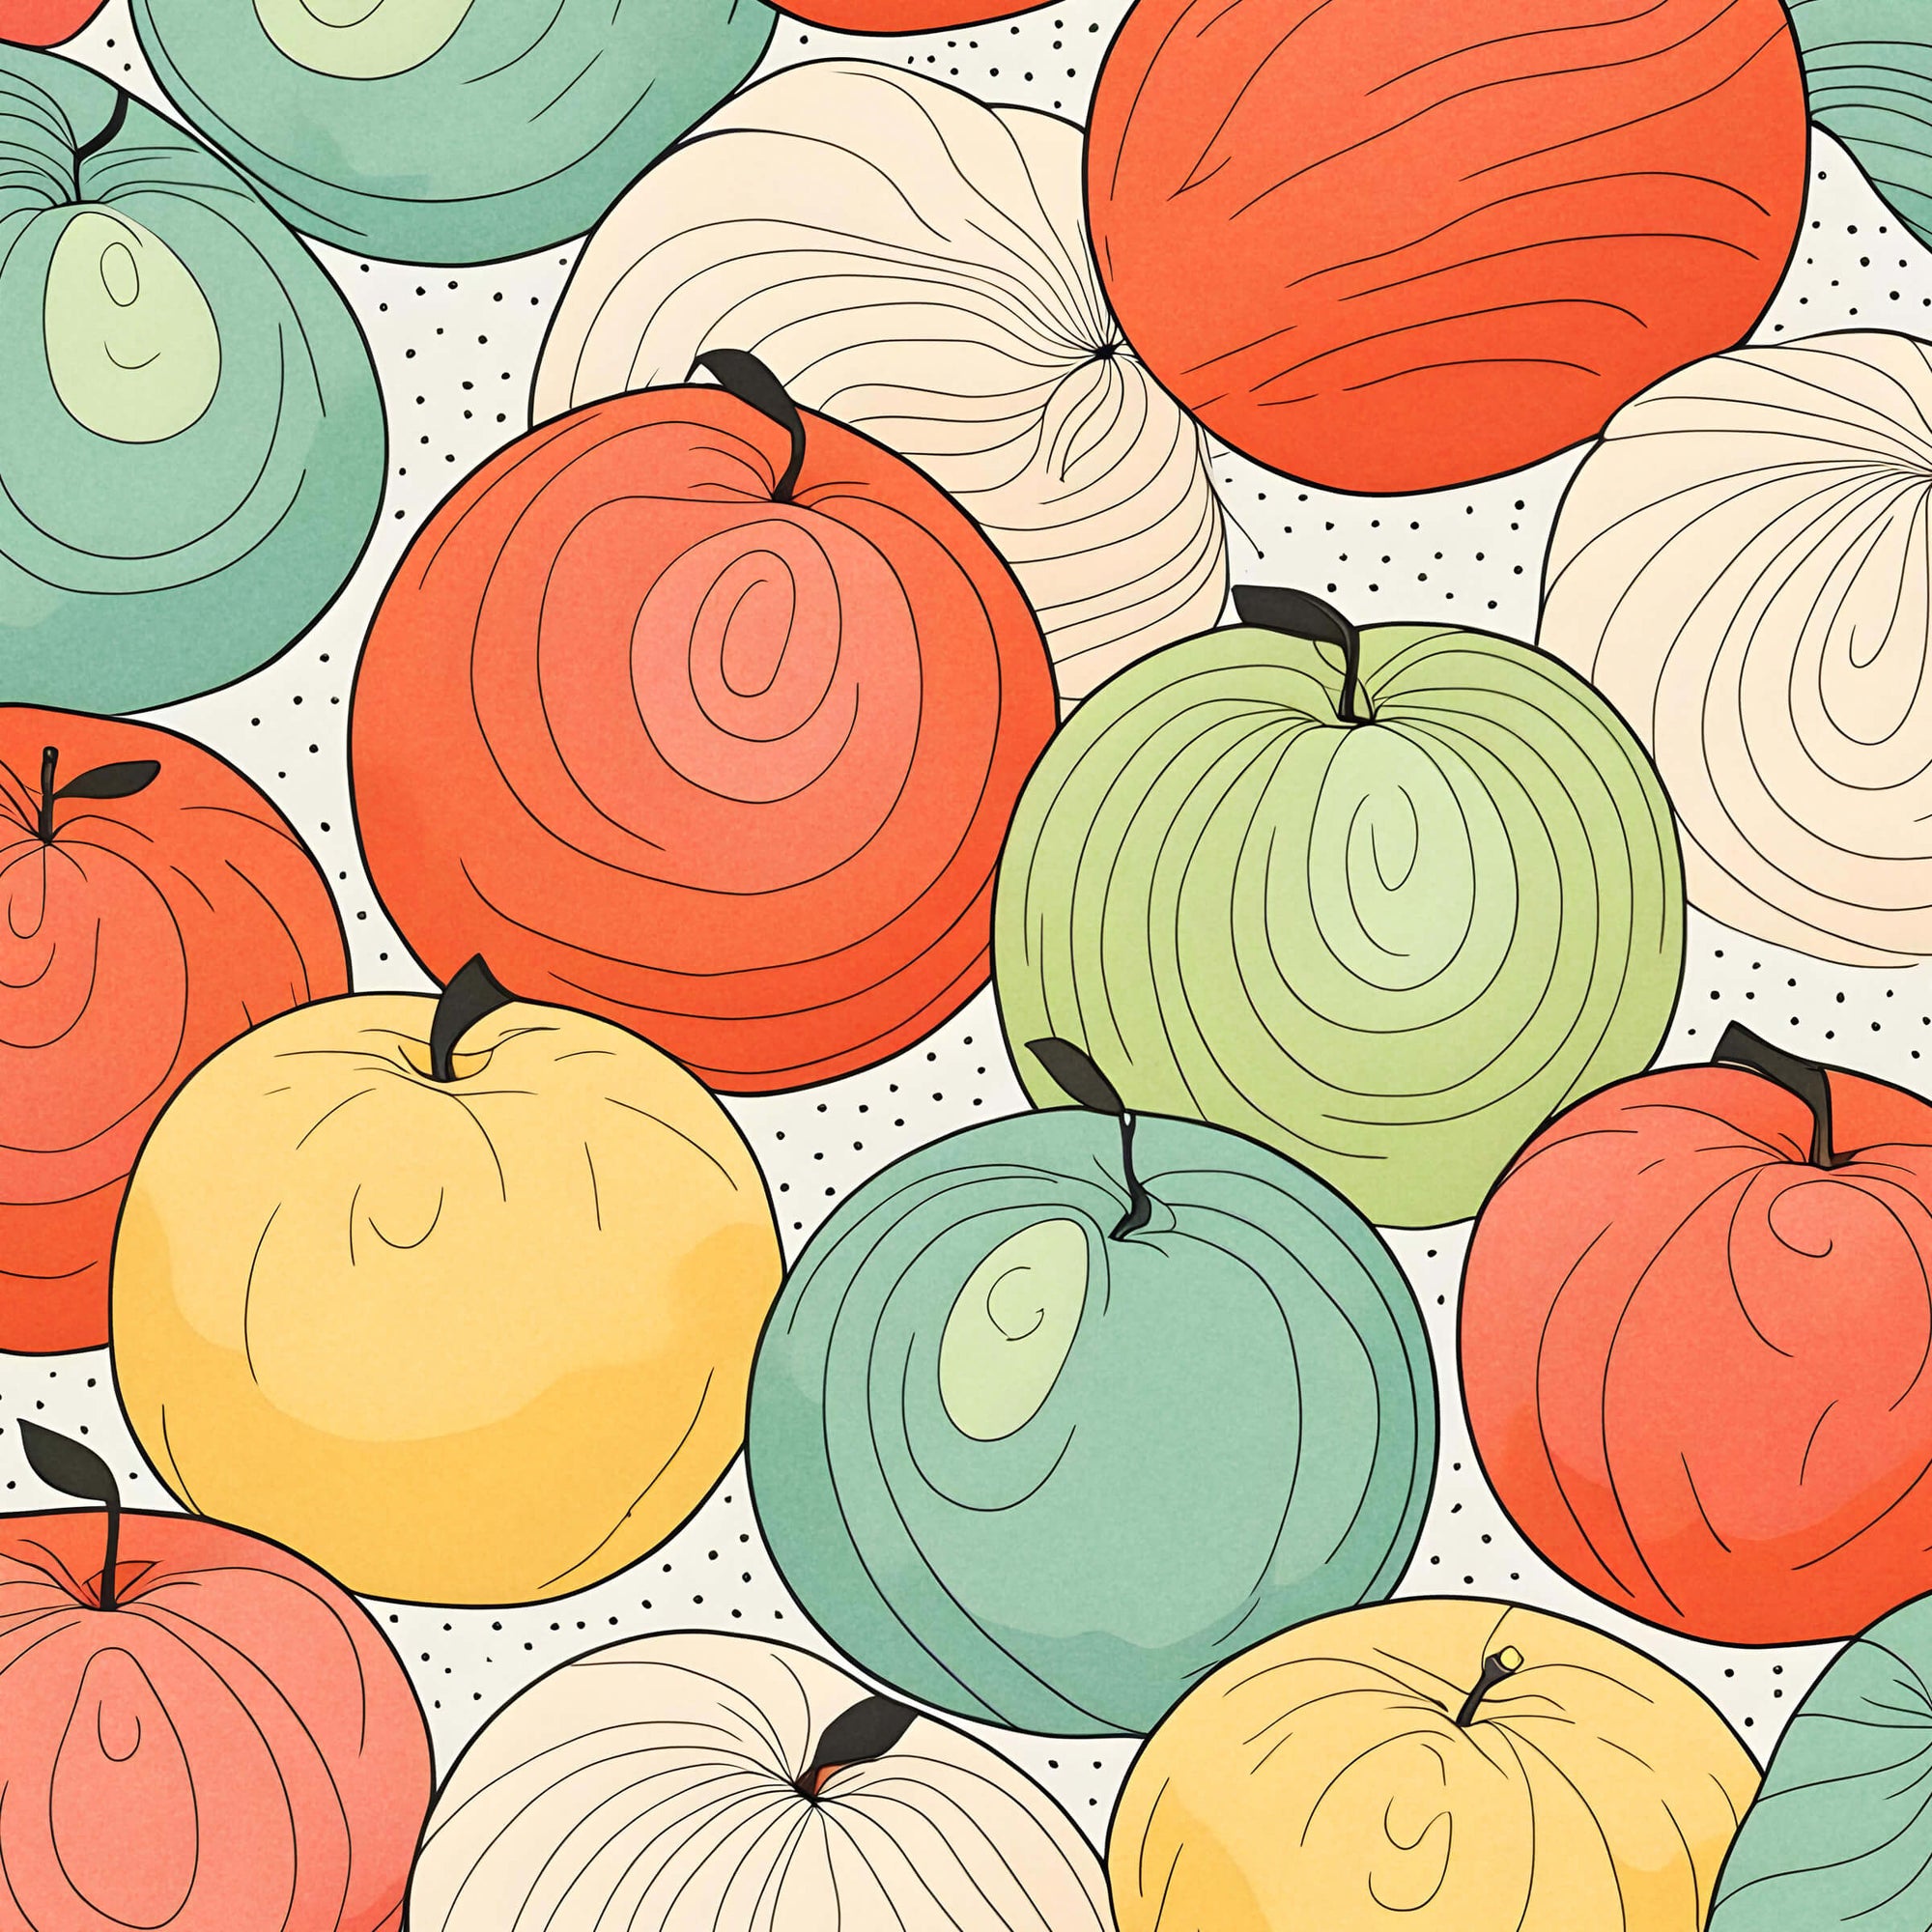 Red or Green Apples? - Interesting facts from the apple world